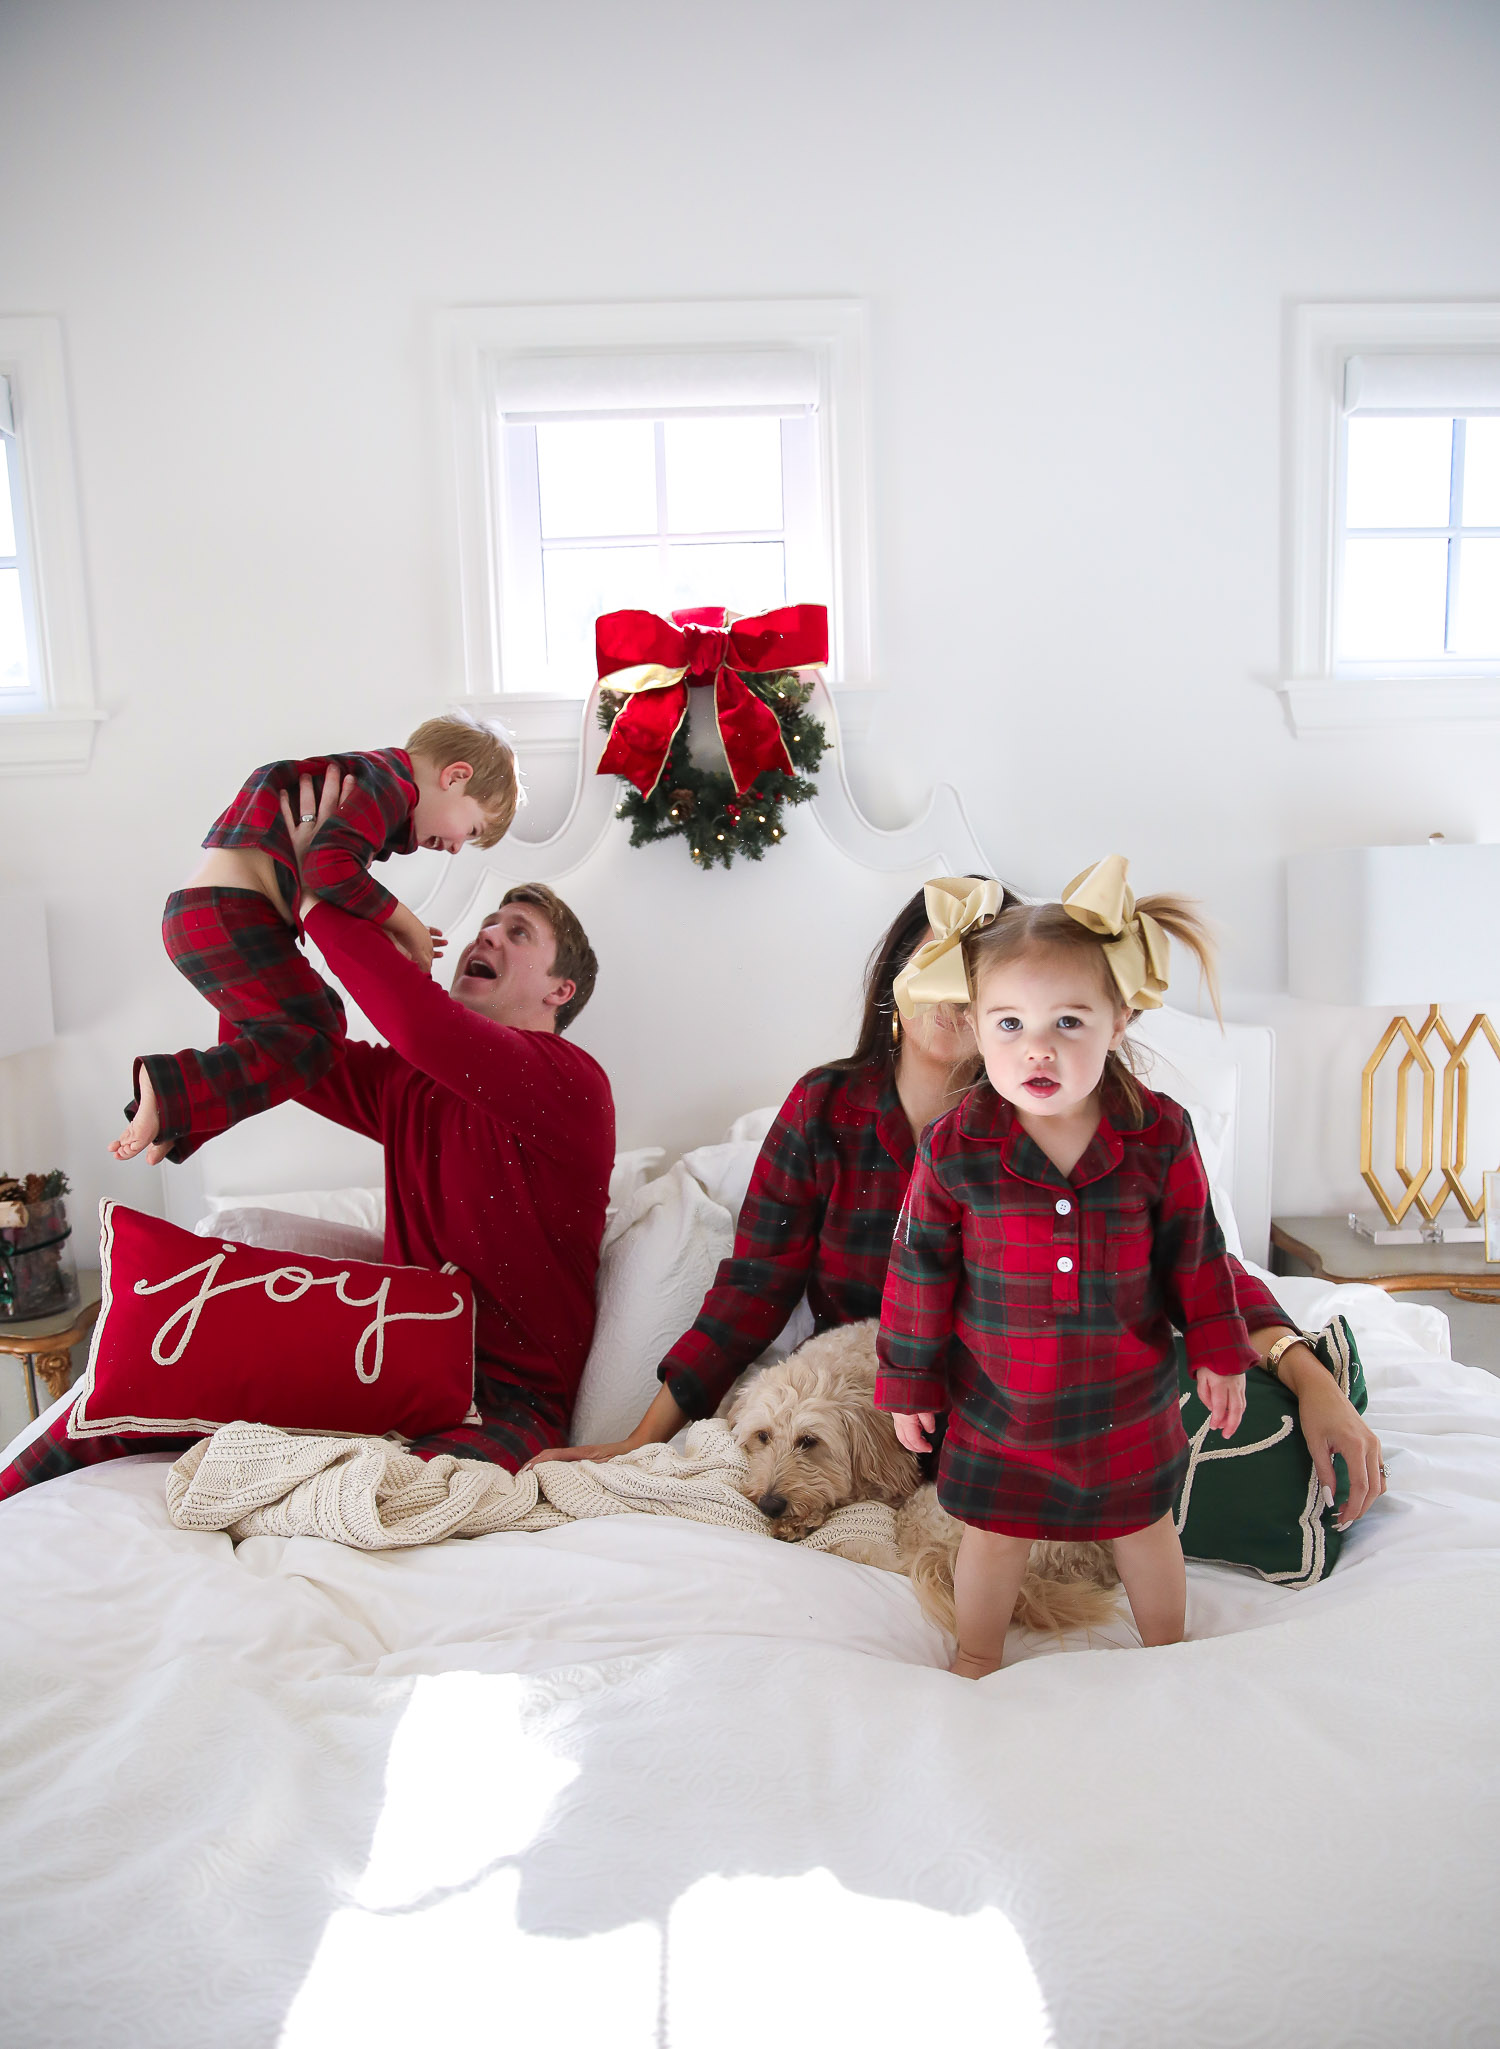 Matching Family Pajamas by popular US fashion blog, The Sweetest Thing: image of a family sitting on a bed with white bedding, a joy throw pillow, a merry throw pillow and a mini Christmas wreath hanging on the headboard and wearing a The Company Store Family Flannel Company Cotton™ Womens Pajama Set, The Company Store Family Flannel Company Cotton™ Girls’ Sleepshirt, The Company Store Family Flannel Company Cotton™ Kids’ Pajama Set, The Company Store Family Flannel Company Cotton™ Mens Pajama Set, and The Company Store Family Flannel Company Cotton™ Dog Pajamas.